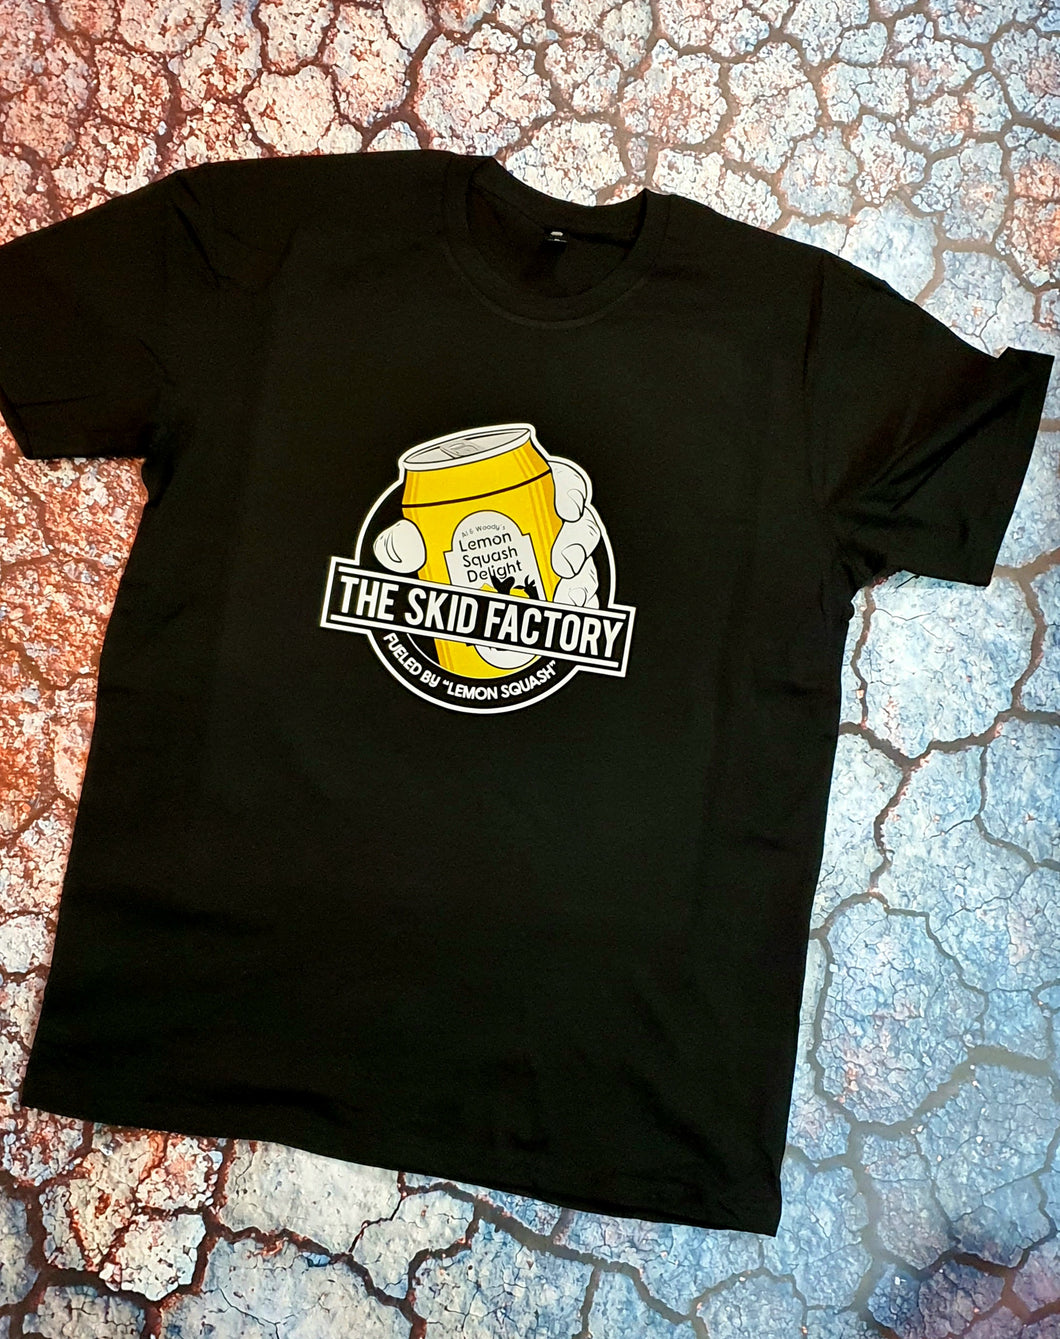 The Skid Factory - Fueled by Lemon Squash T-shirt - NOW REDUCED TO $25